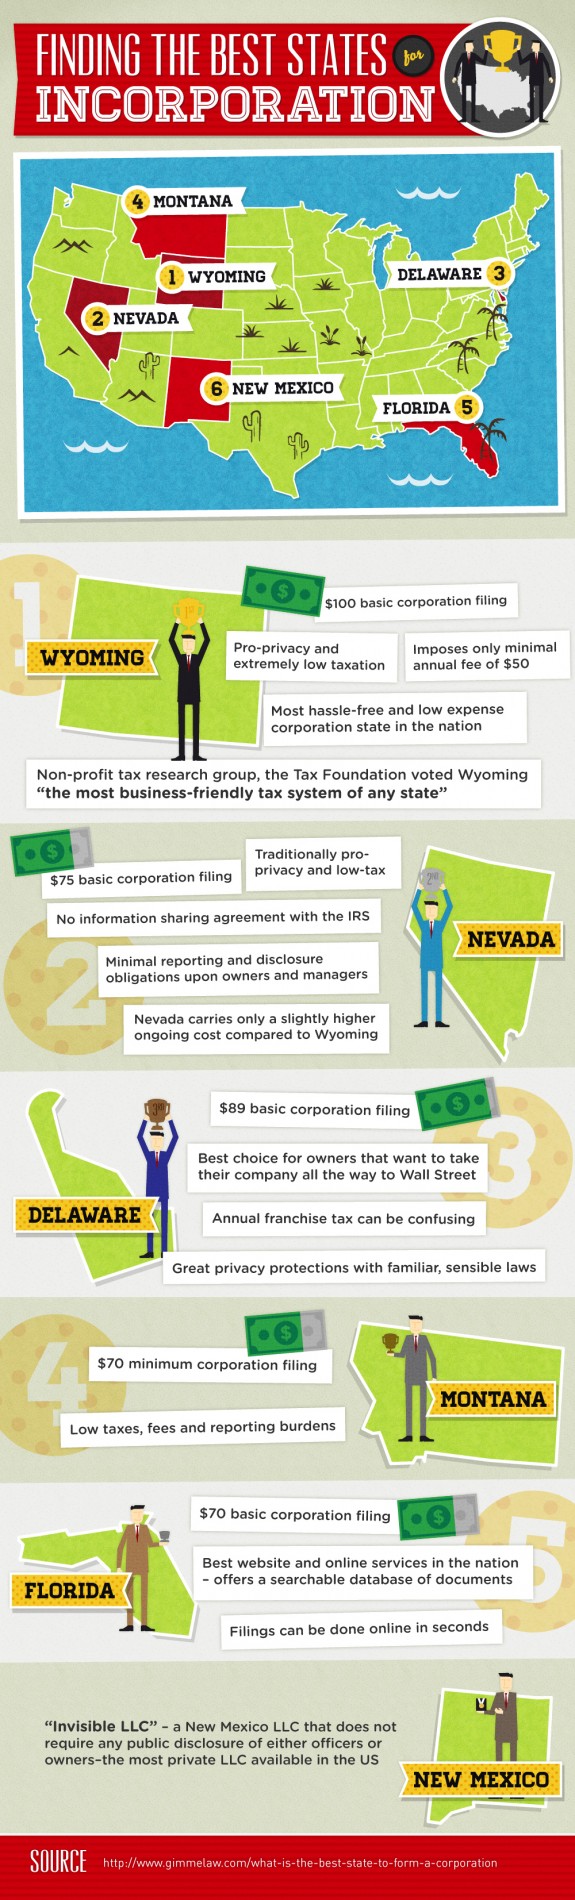 Thumbnail for Finding The Best States for Incorporation Infographic